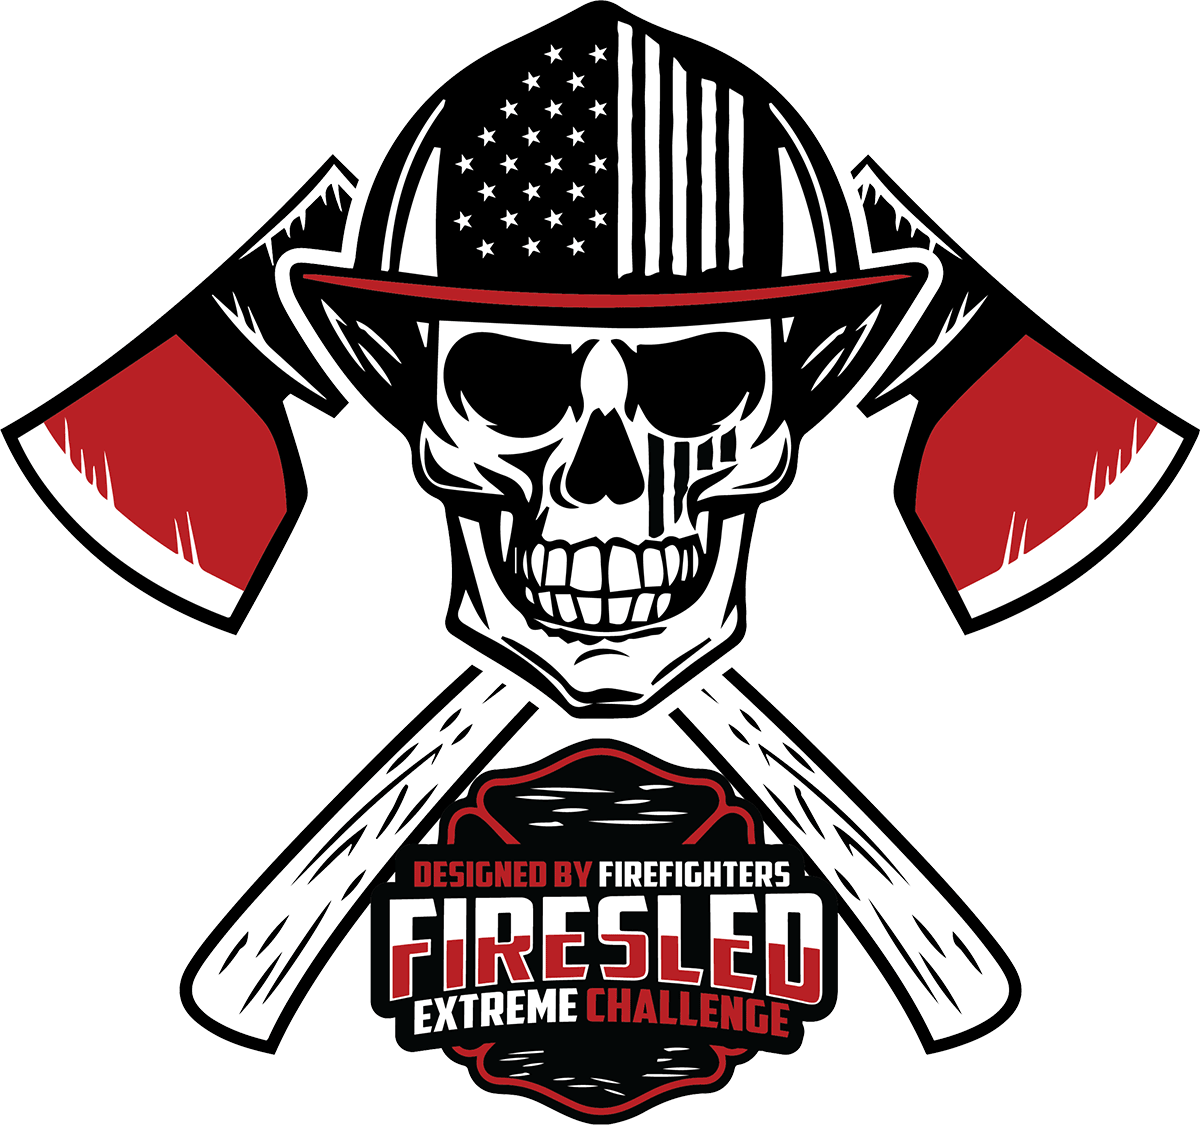 Firesled Extreme Challeng